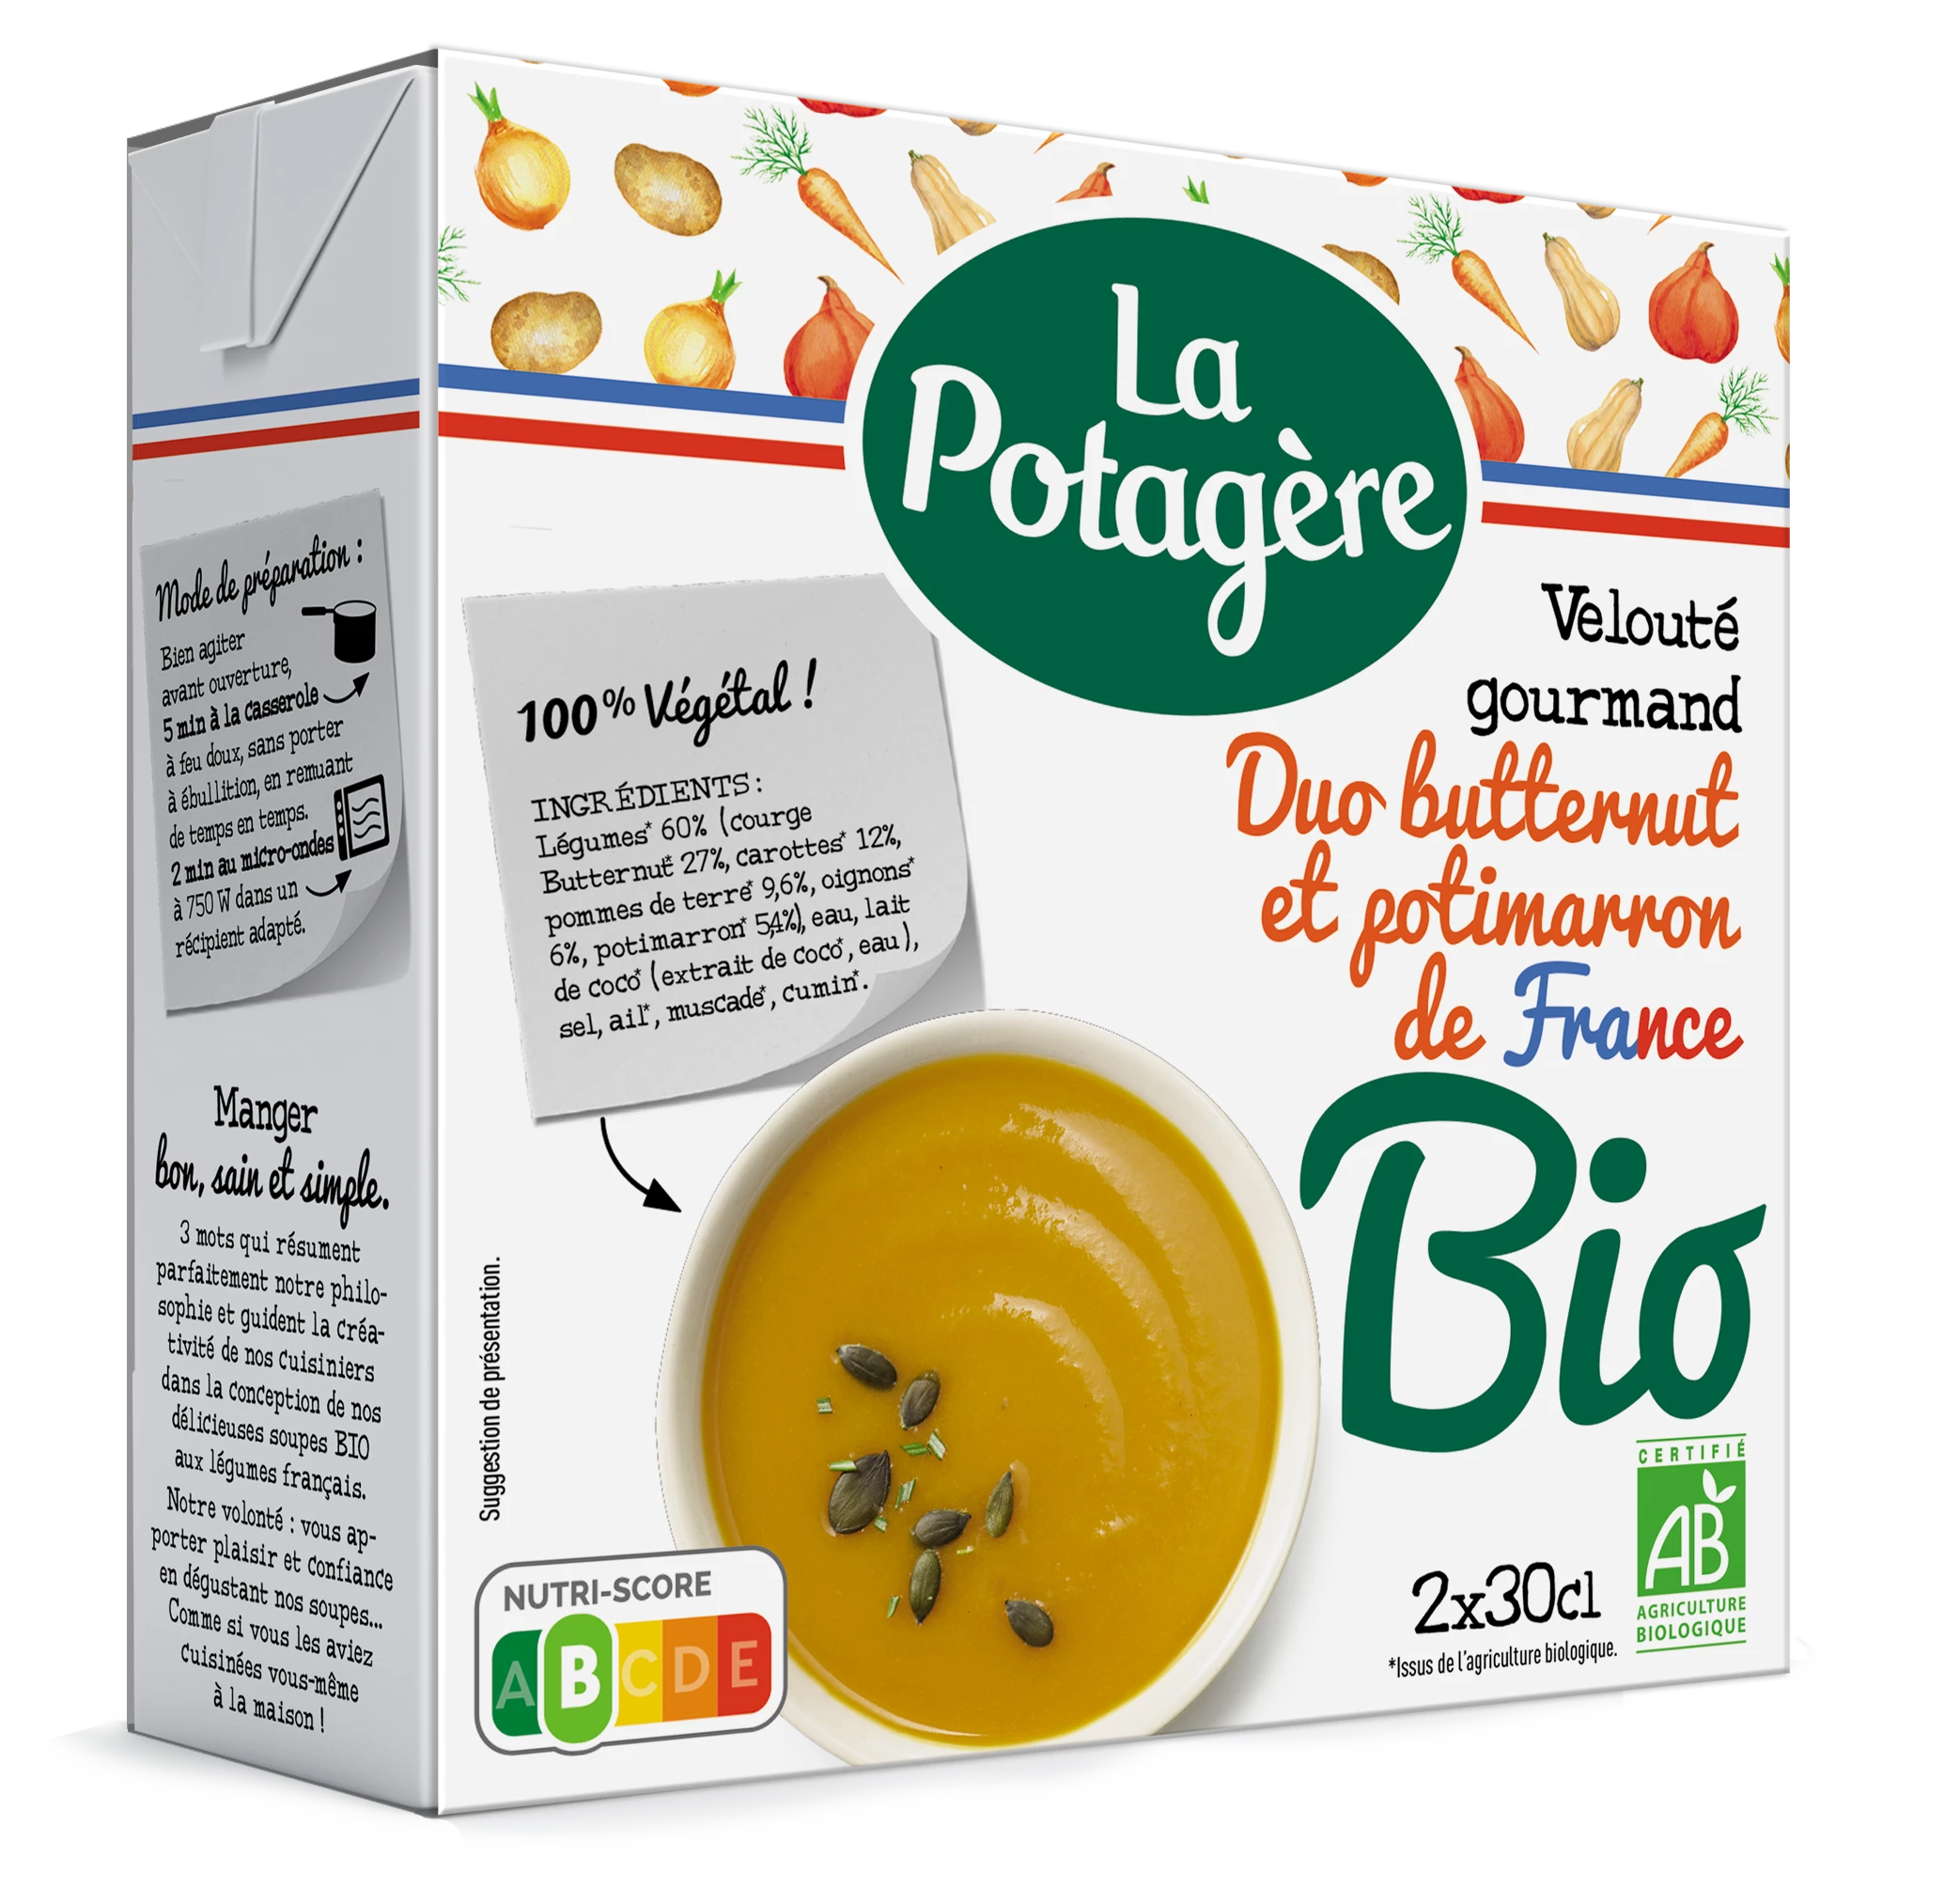 Gourmet velouté, duo of organic butternut and pumpkin from France, 2x30cl, LA POTAGERE